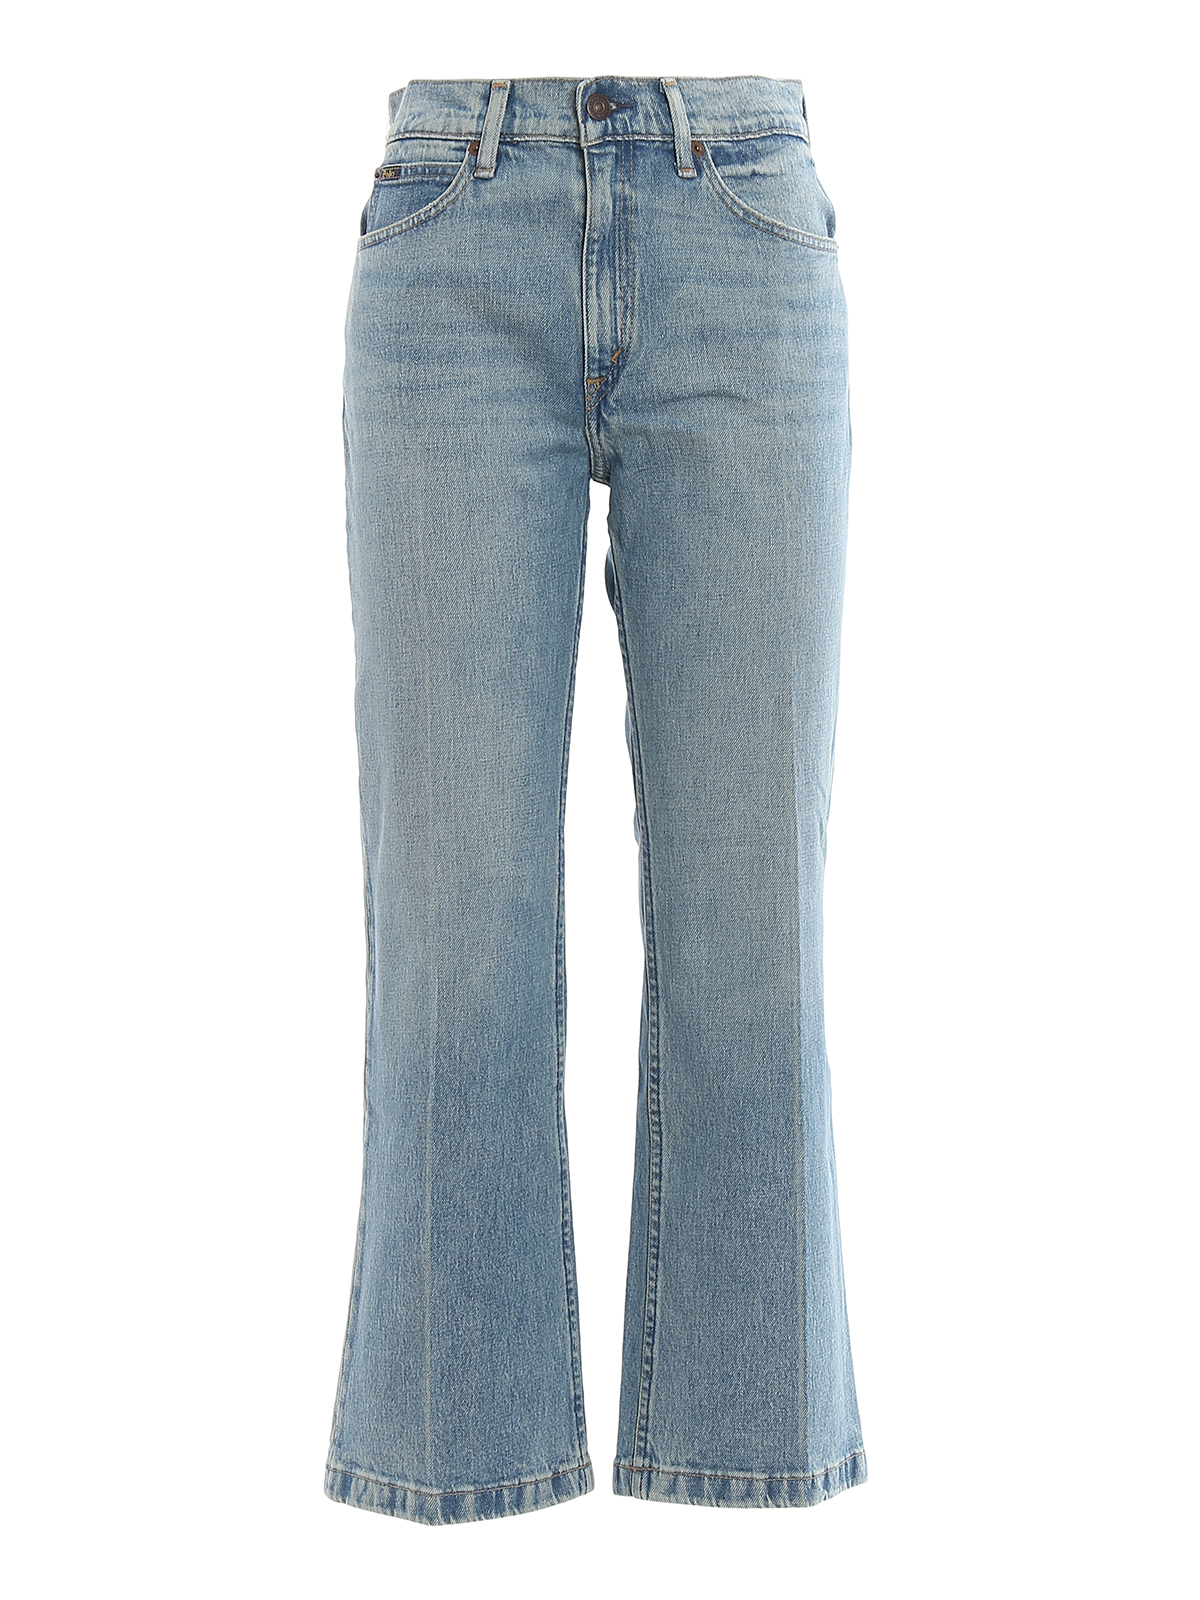 Flared jeans Polo Ralph Lauren - Laight crop flare jeans - 211750479001